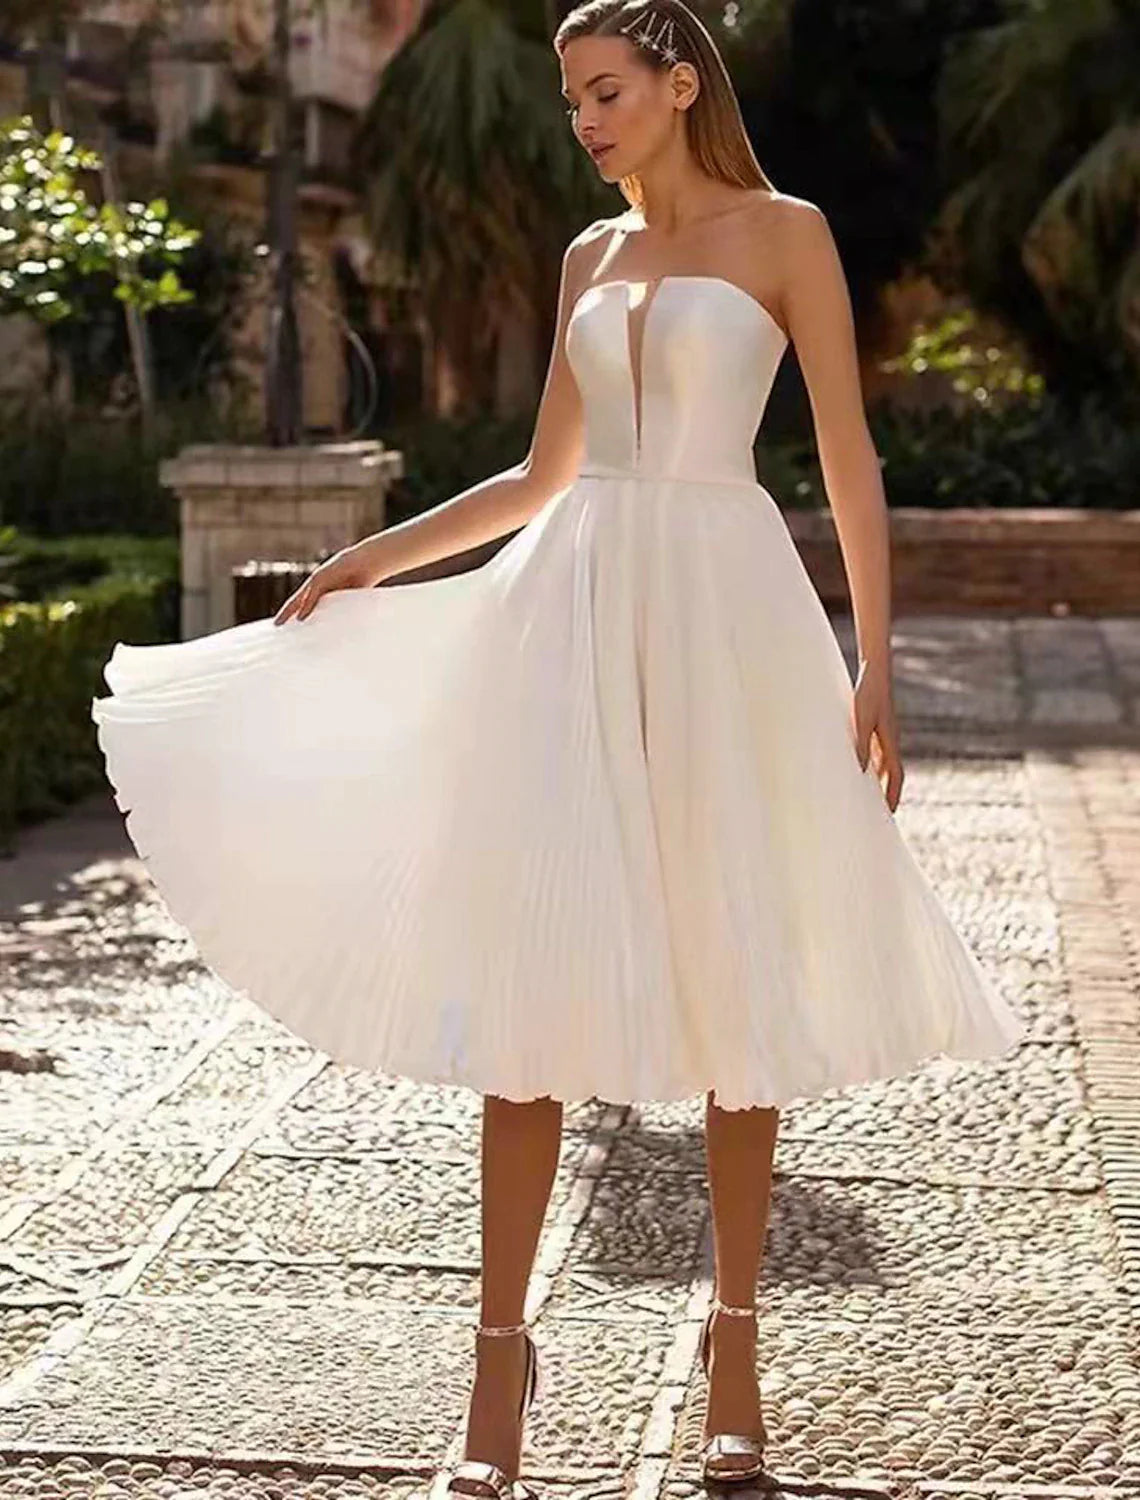 Reception Little White Dresses Wedding Dresses A-Line Sweetheart Strapless Tea Length Satin Bridal Gowns With Sash / Ribbon